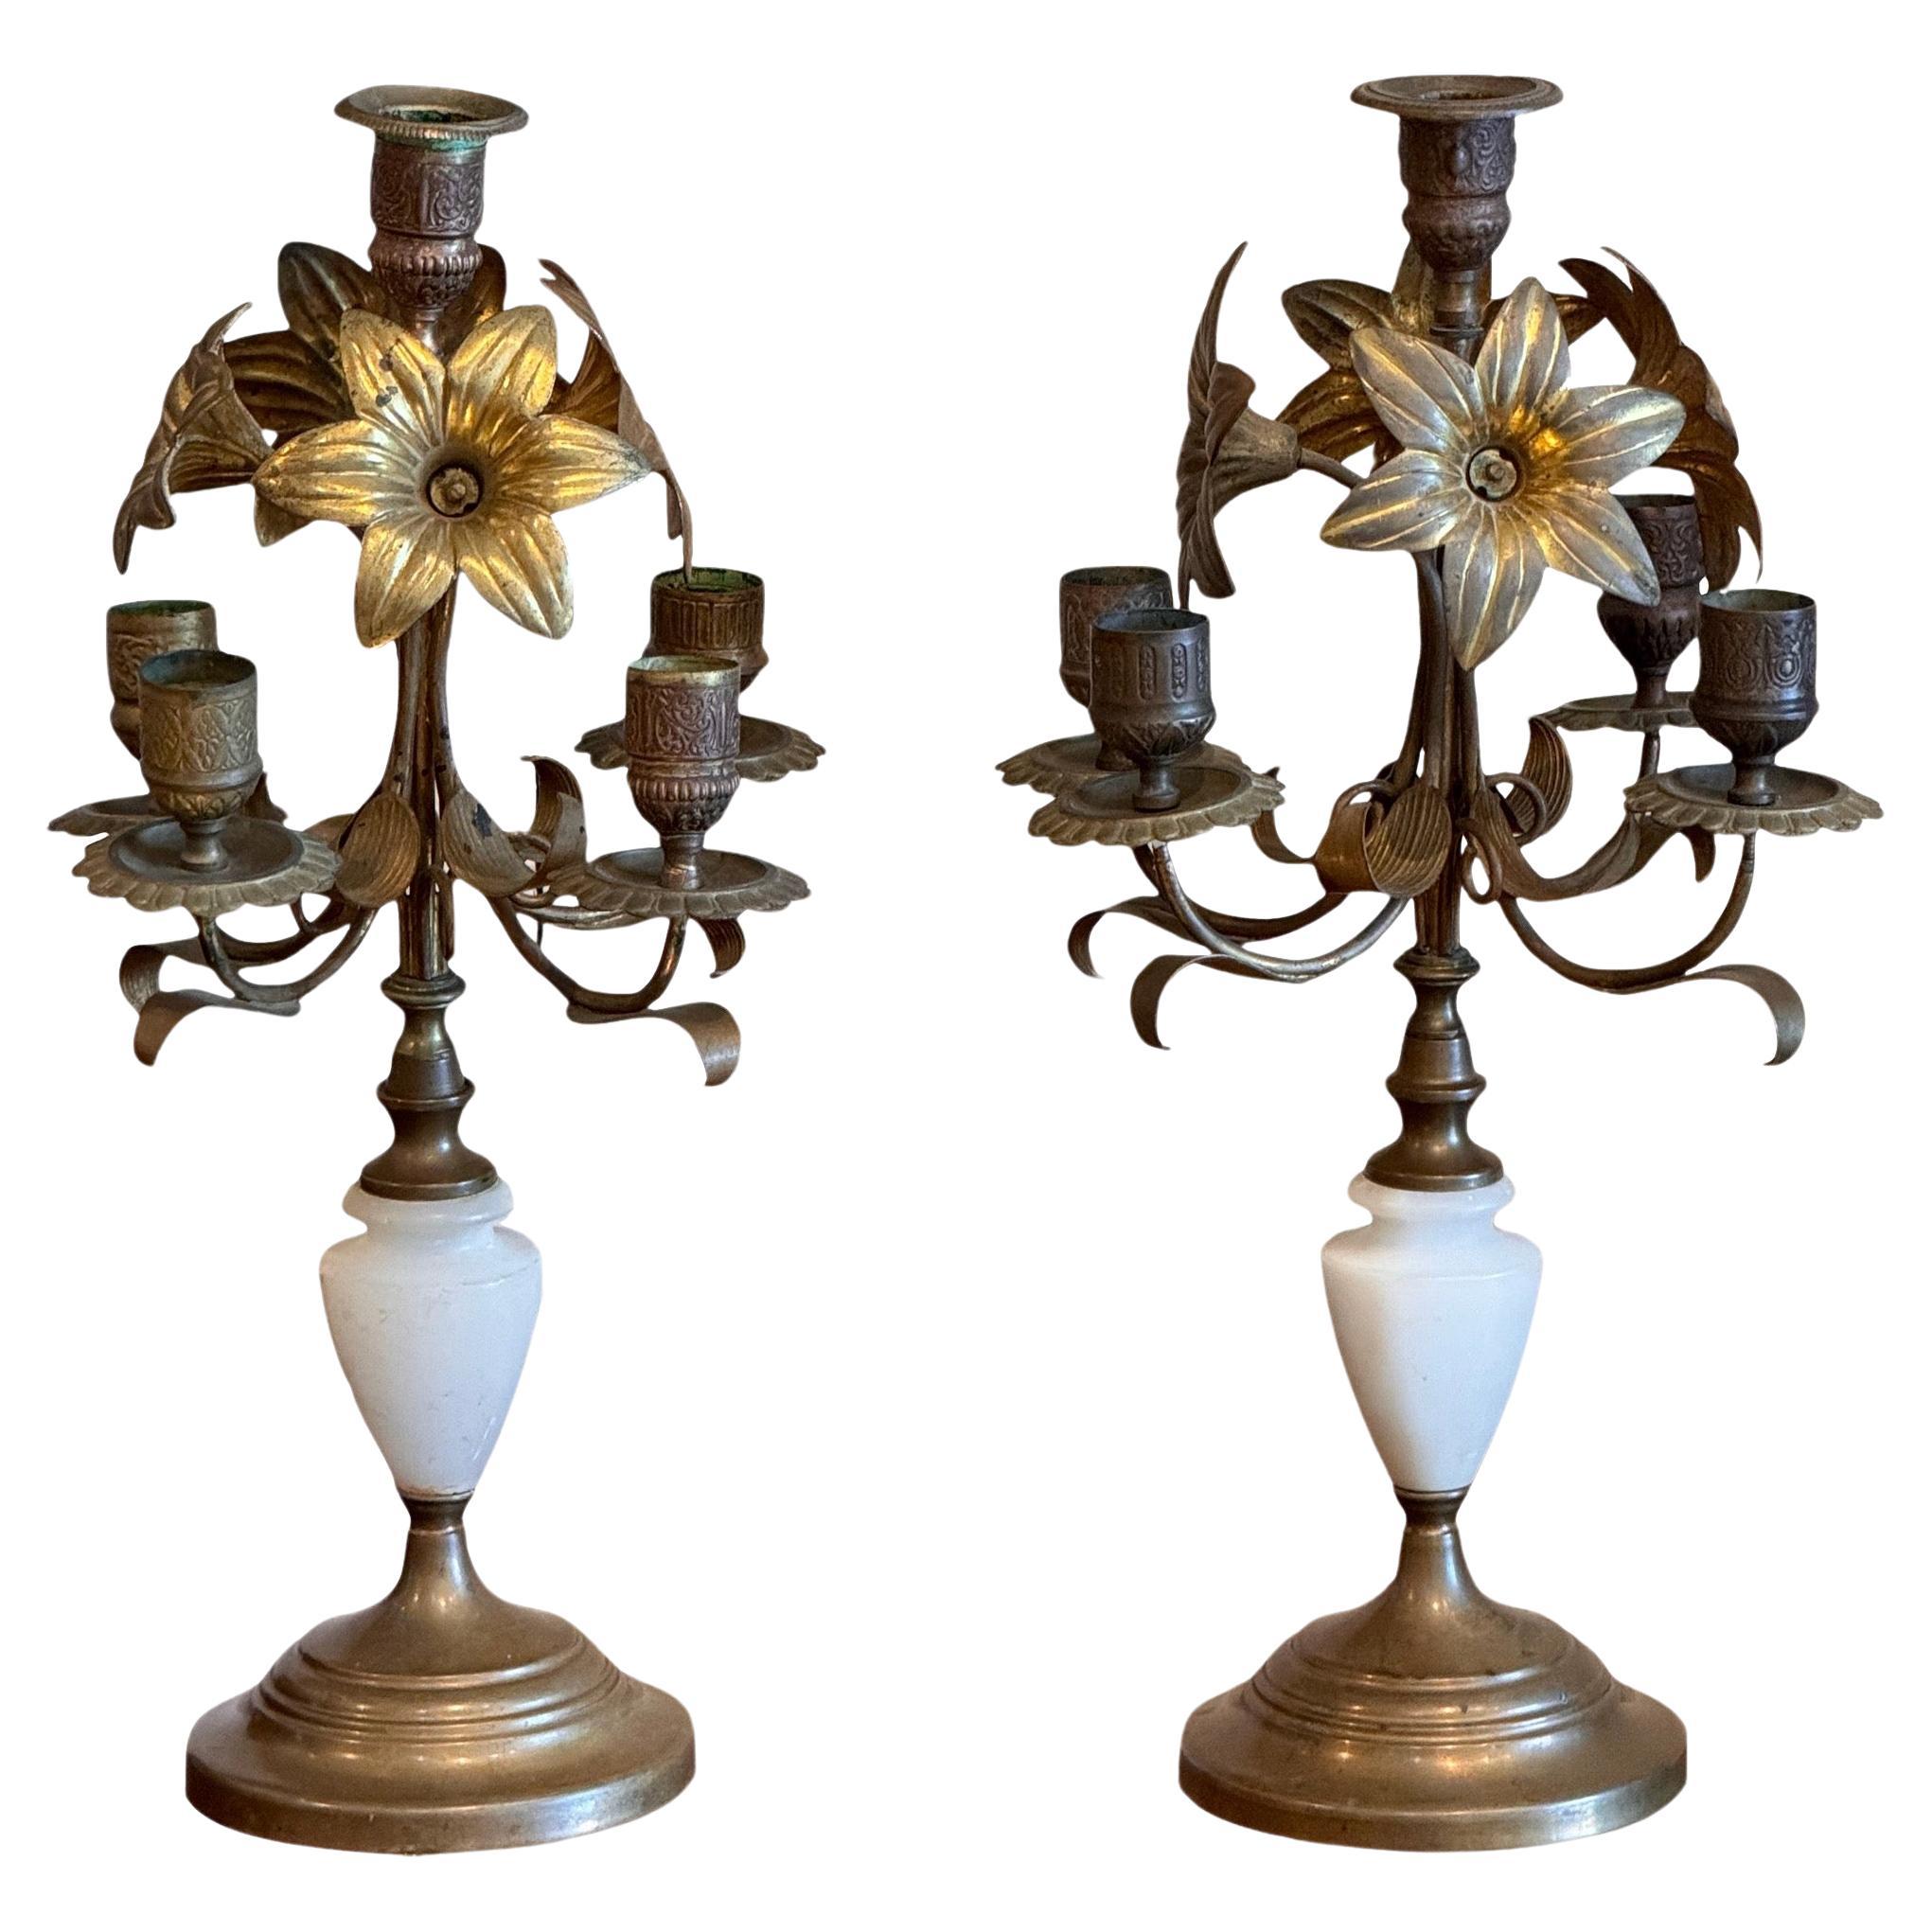 Late 19th Century Brass and Marble Candle Holders - a Pair For Sale